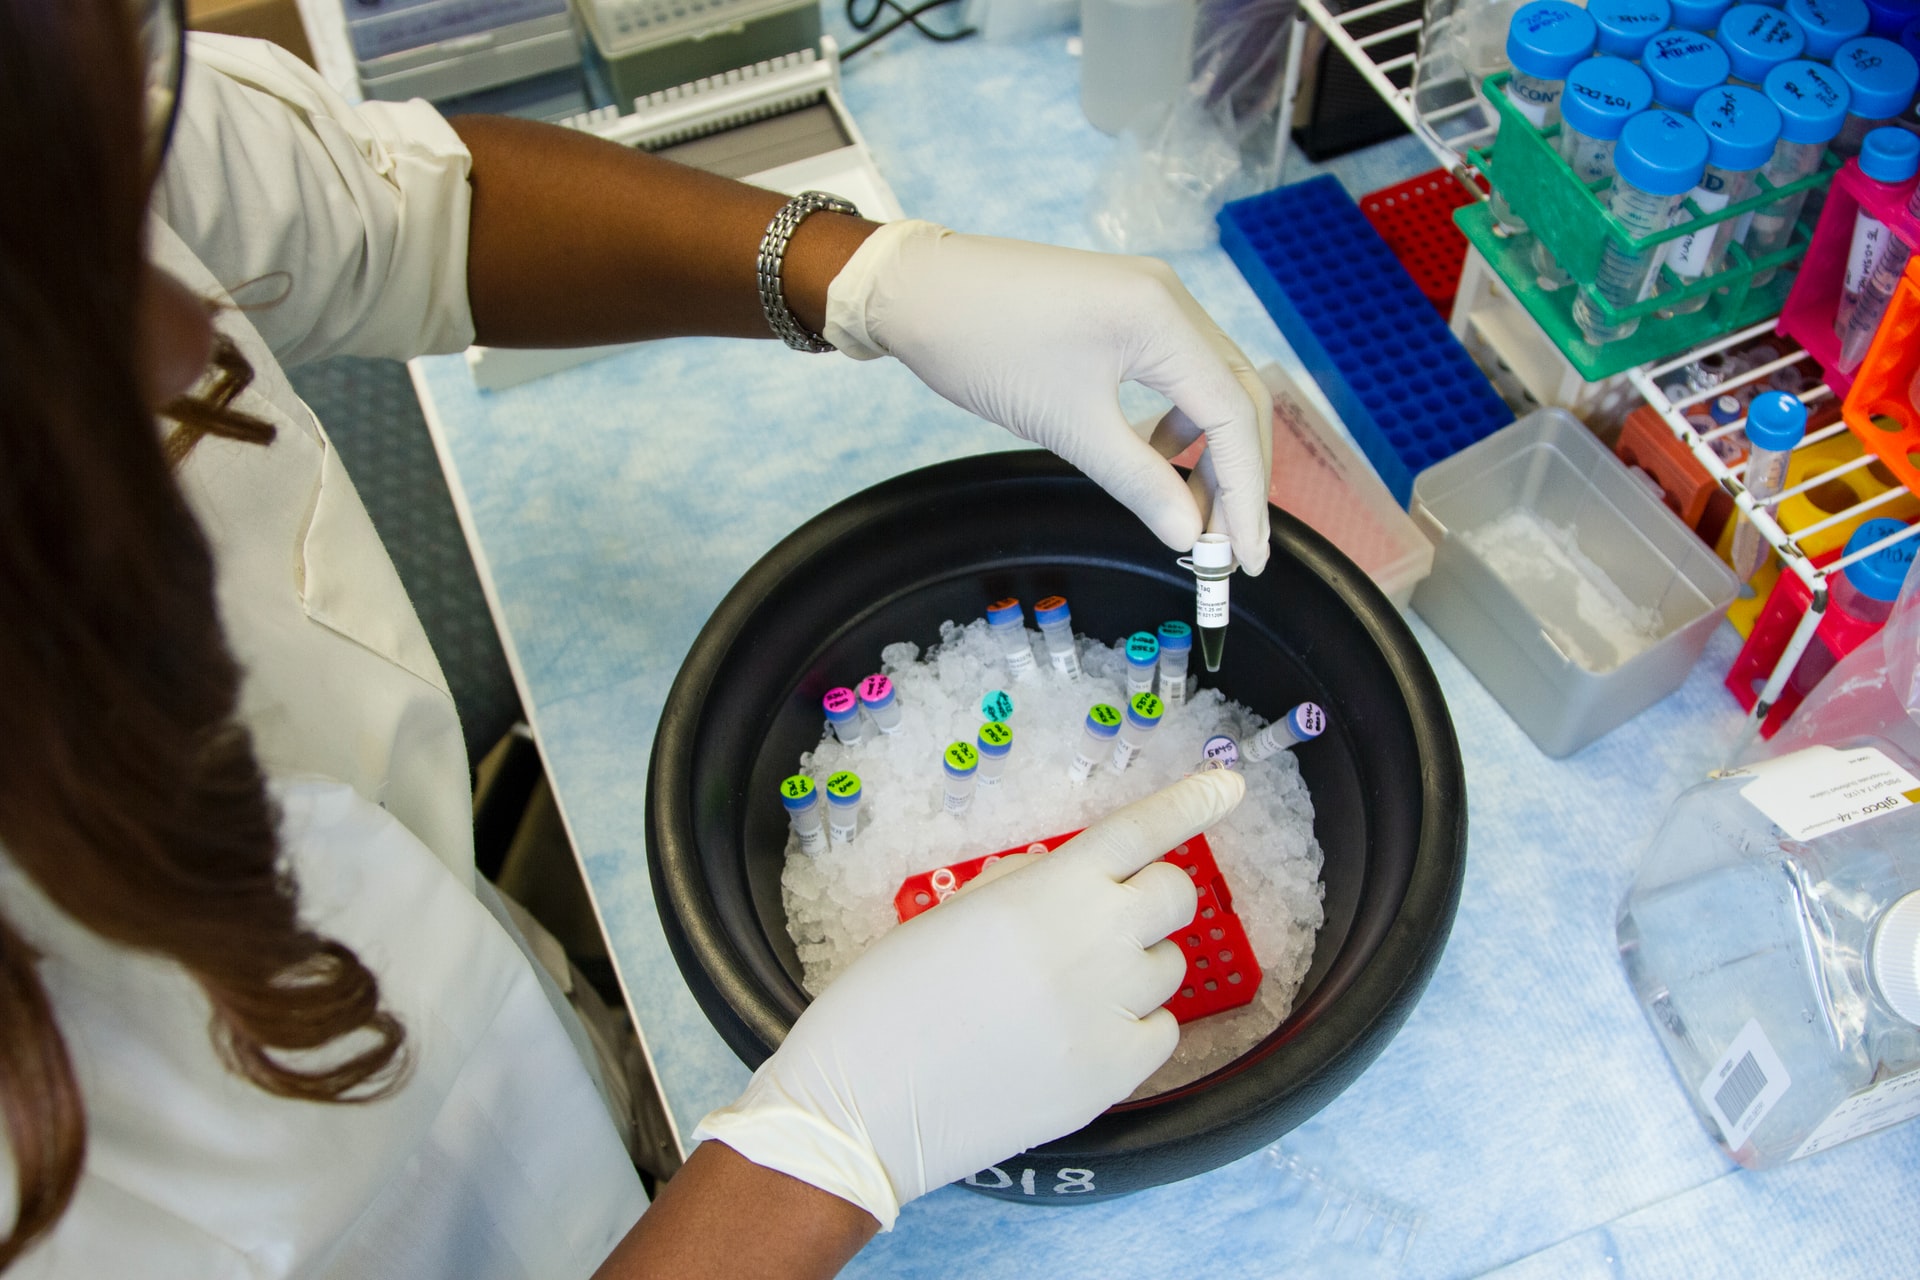 Researcher setting up genetic samples and primers for polymerase chain reaction